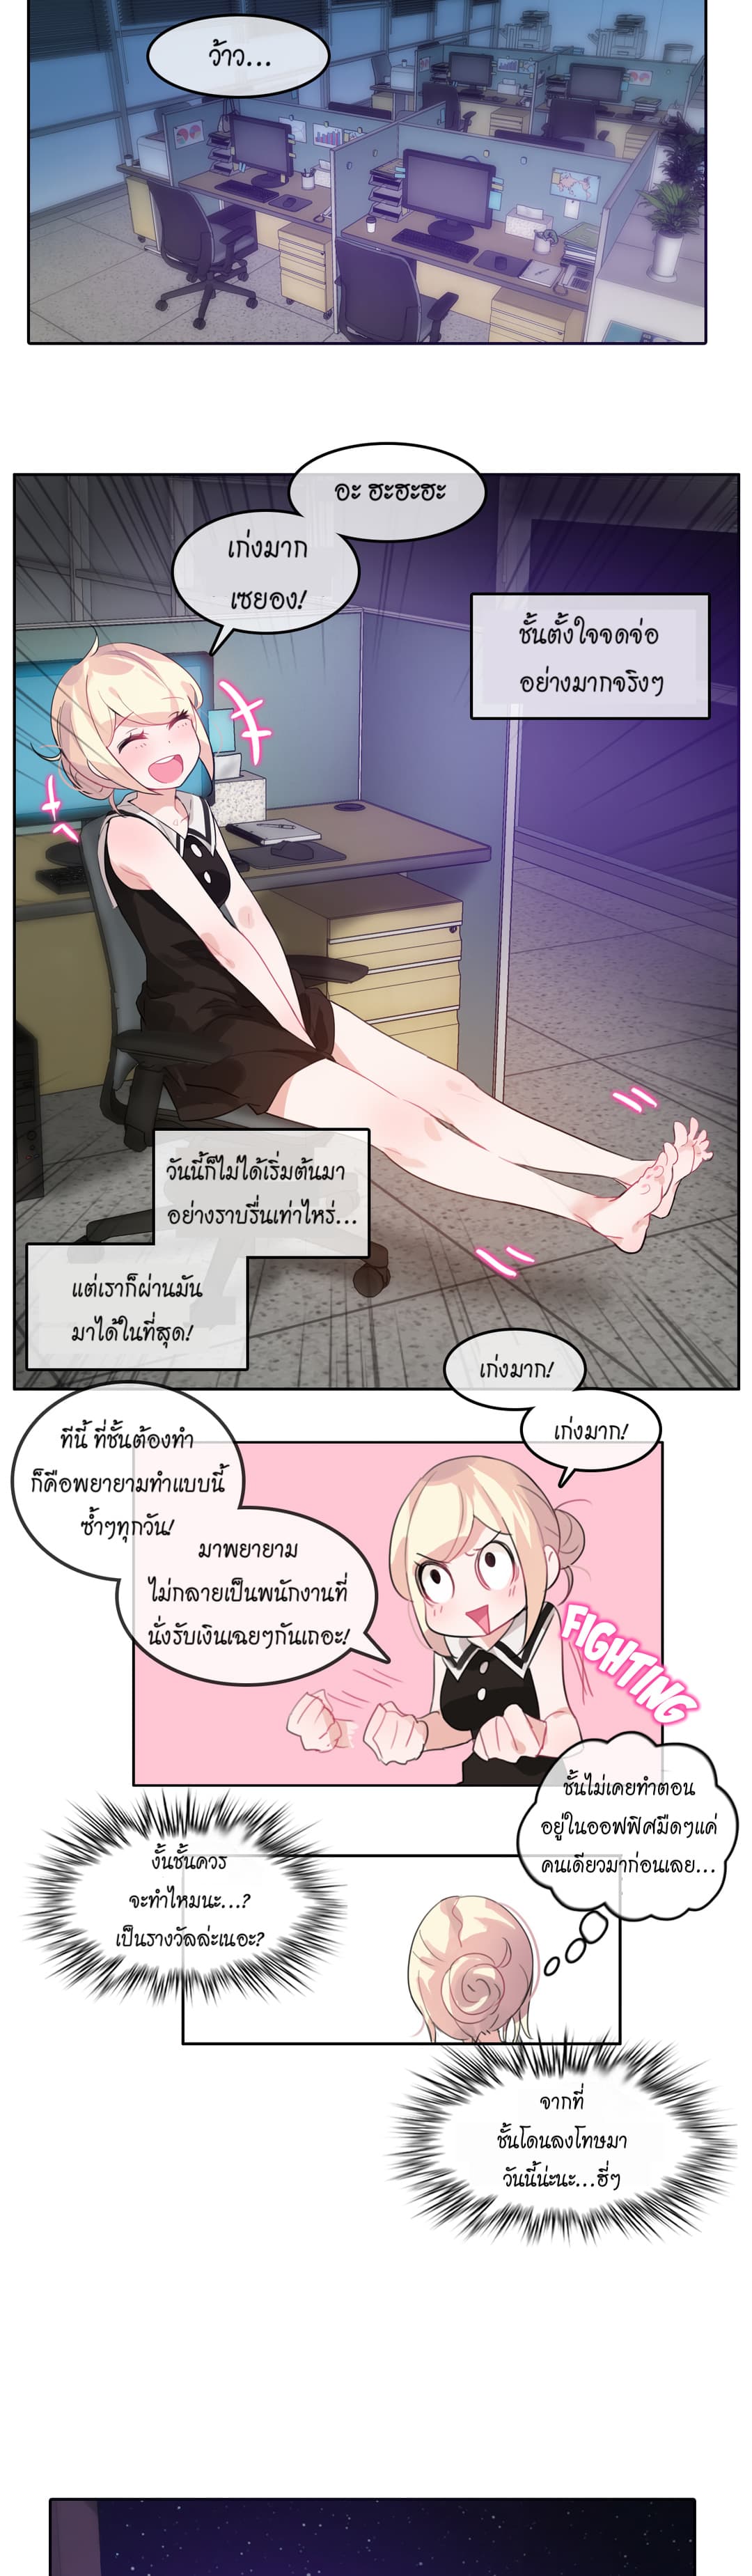 A Pervert’s Daily Life 13 (20)